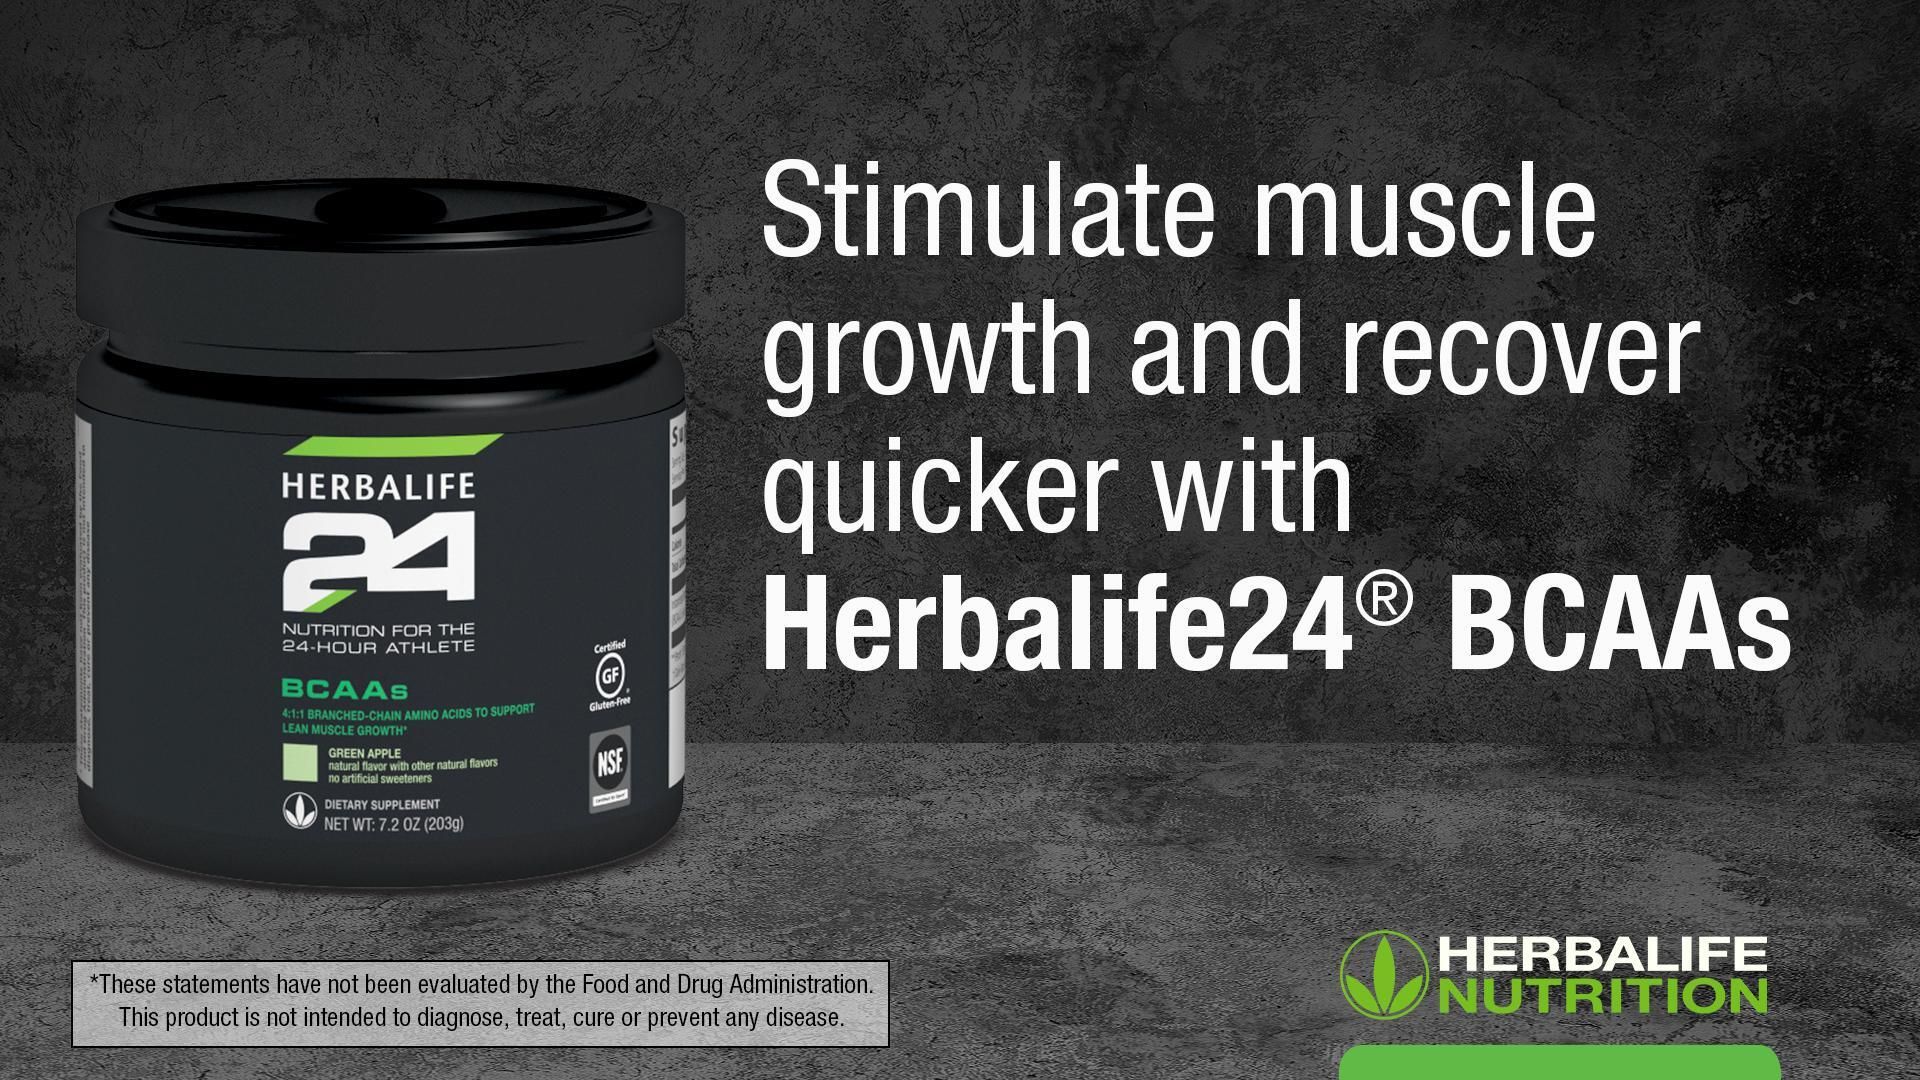 Herbalife24® BCAAs: Know the Products